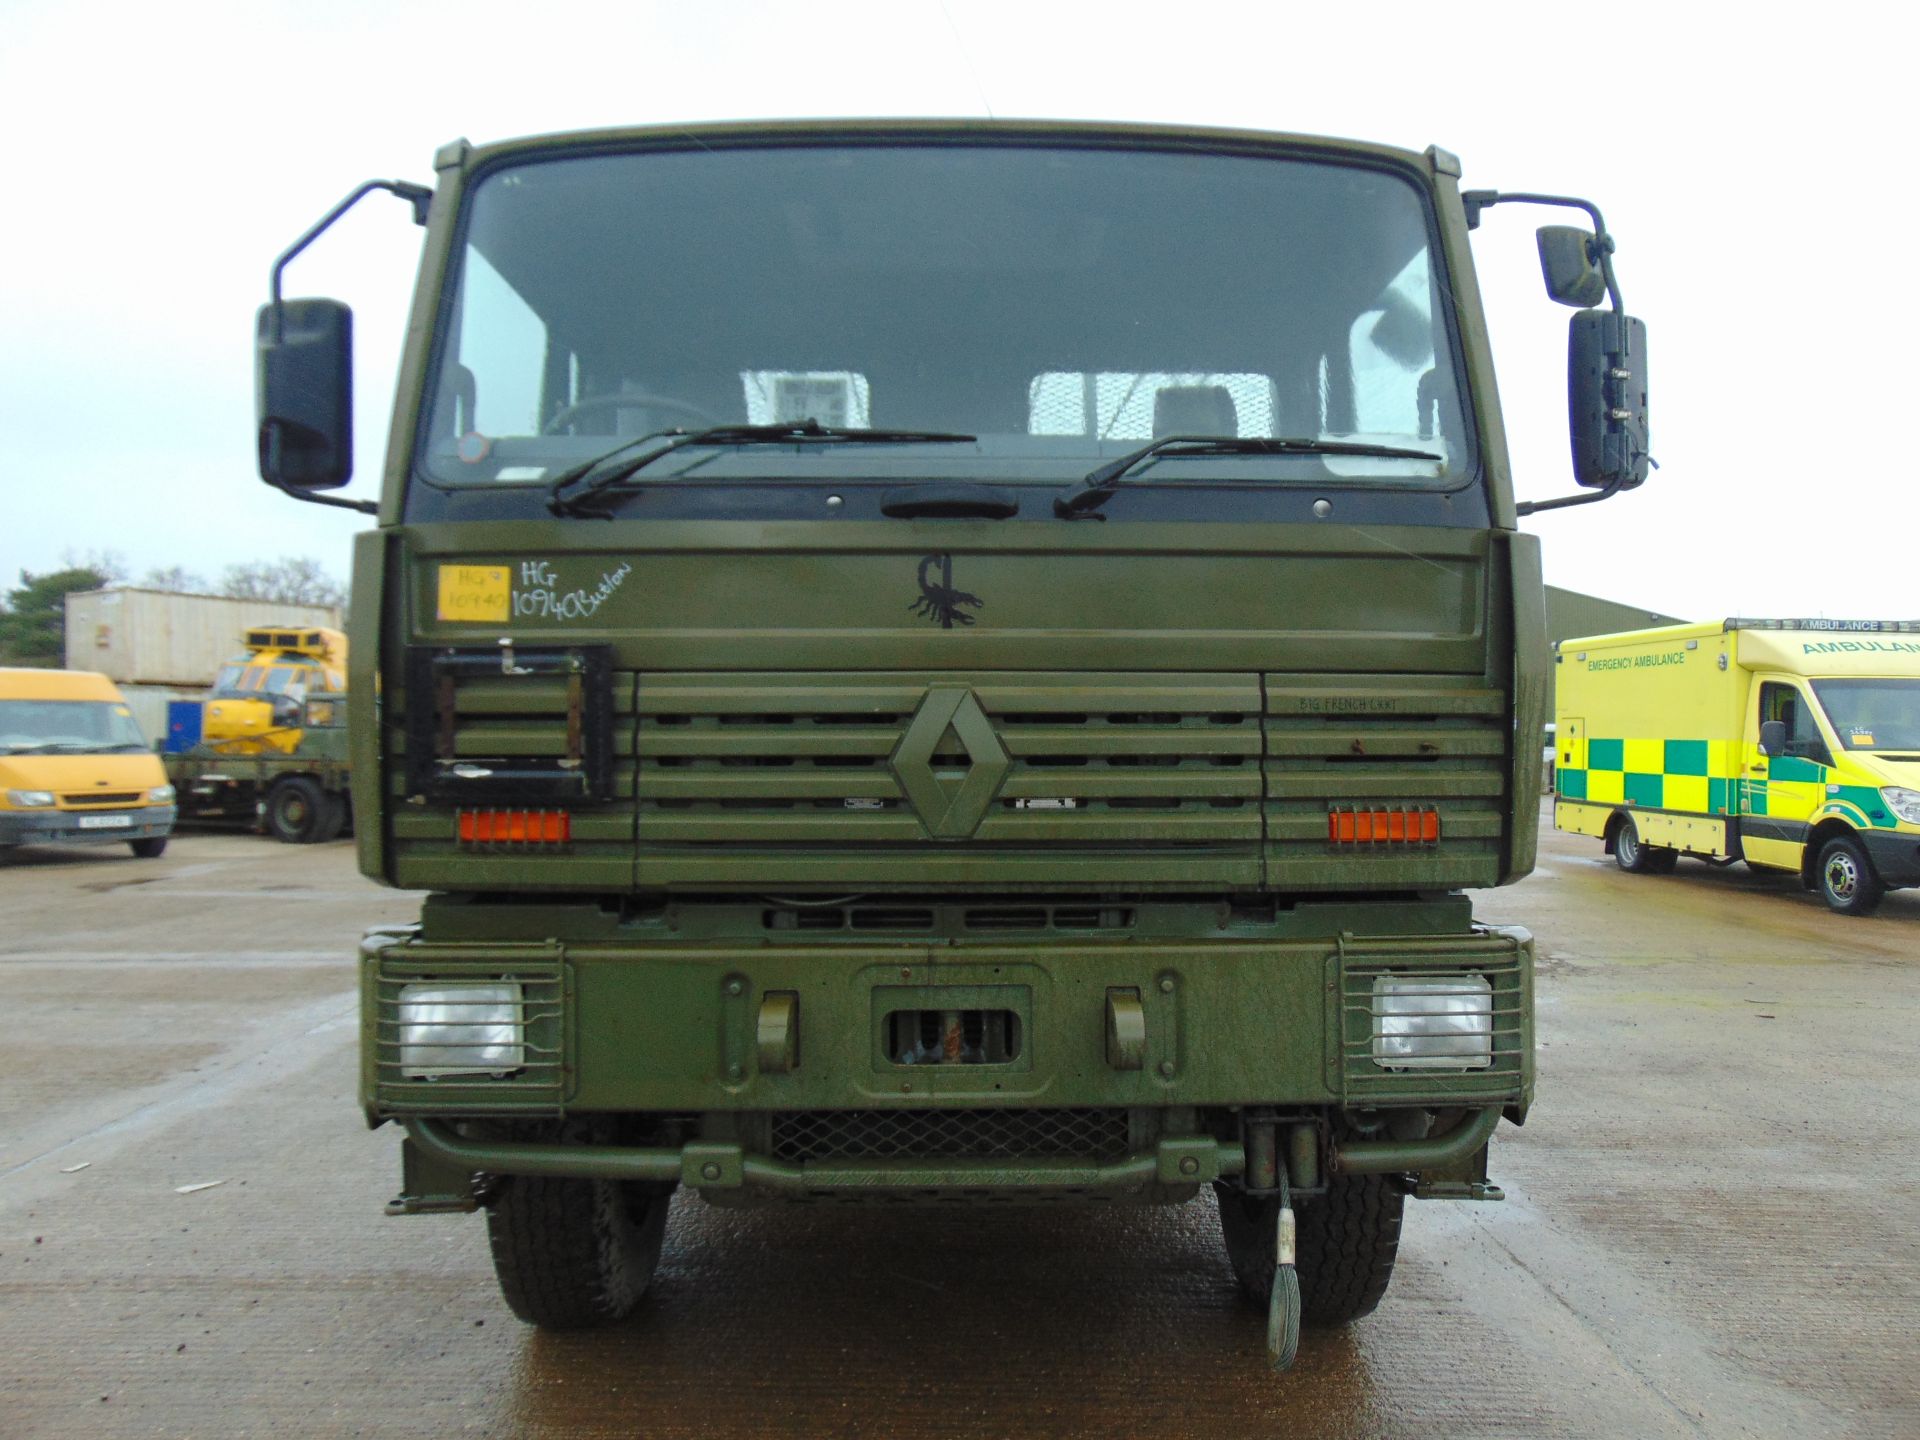 Renault G300 Maxter RHD 4x4 8T Cargo Truck with fitted winch - Image 2 of 16